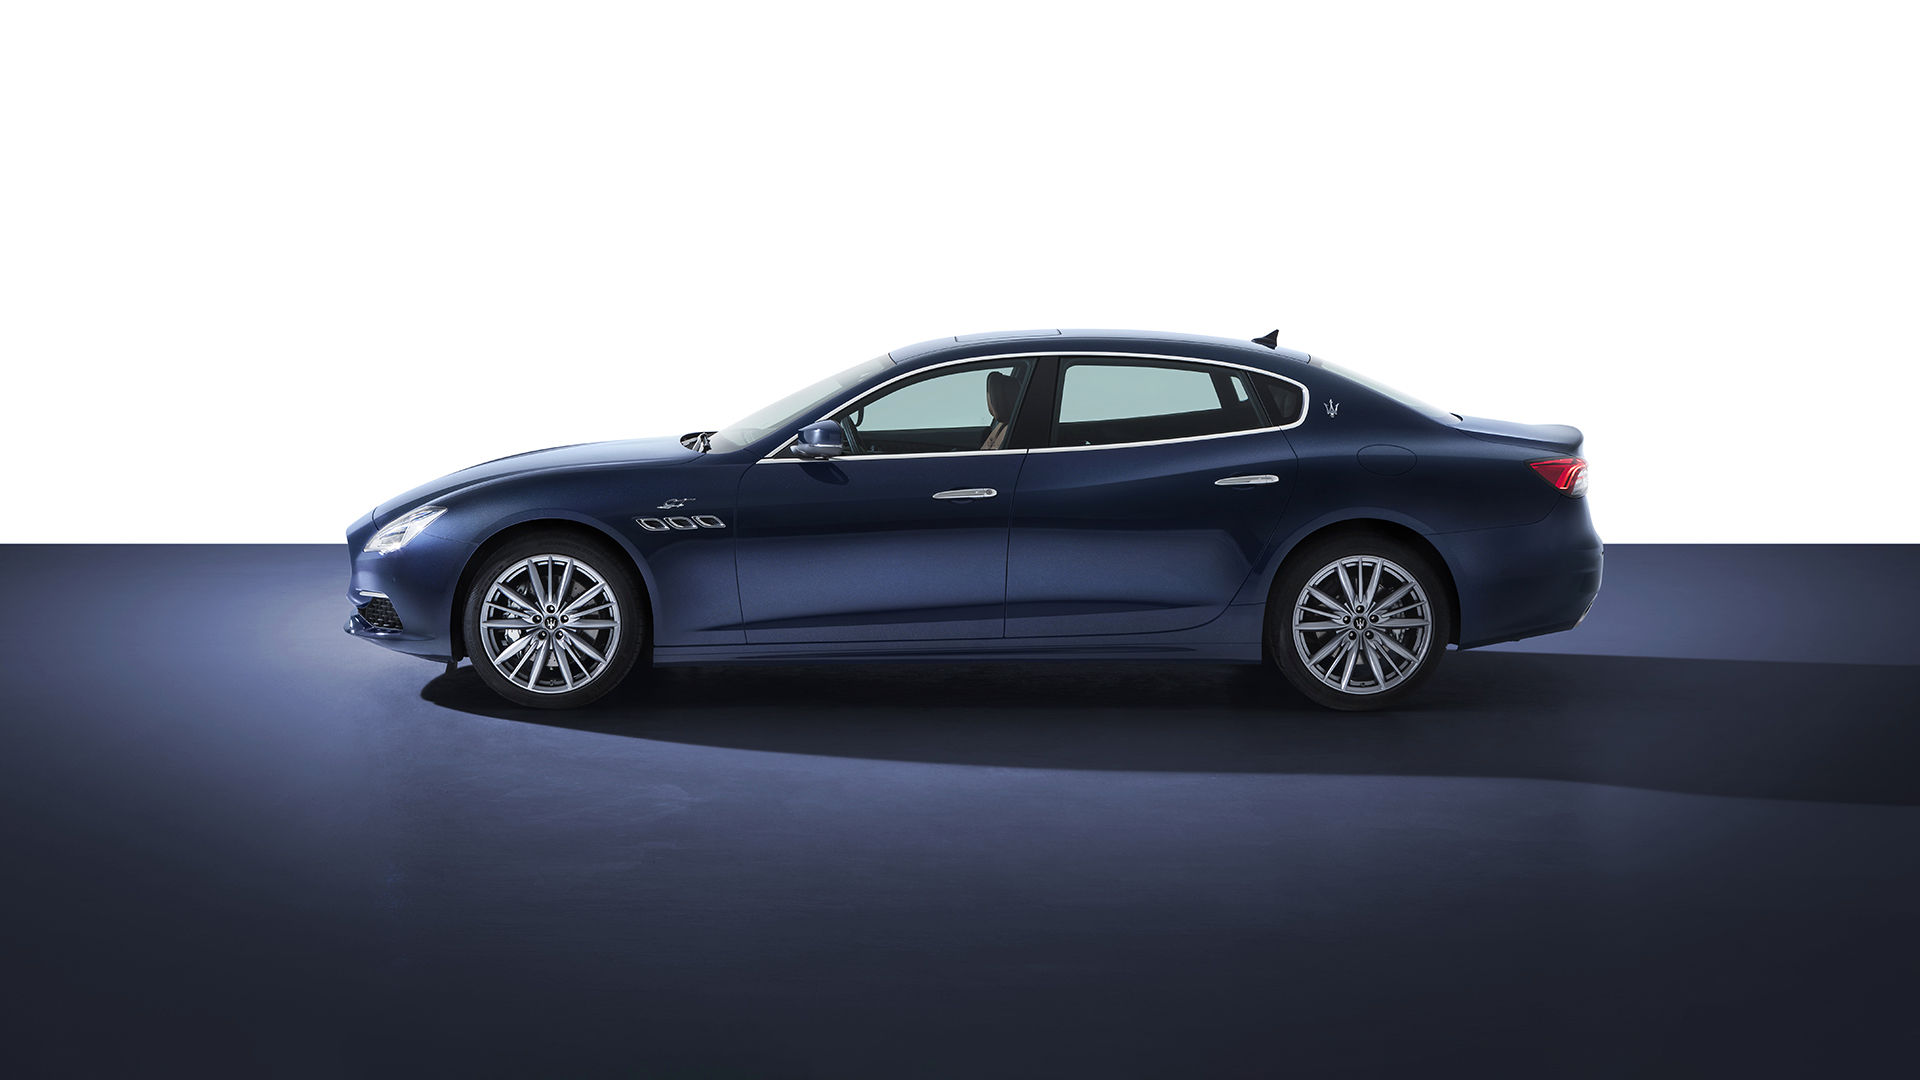 Sideview of Quattroporte